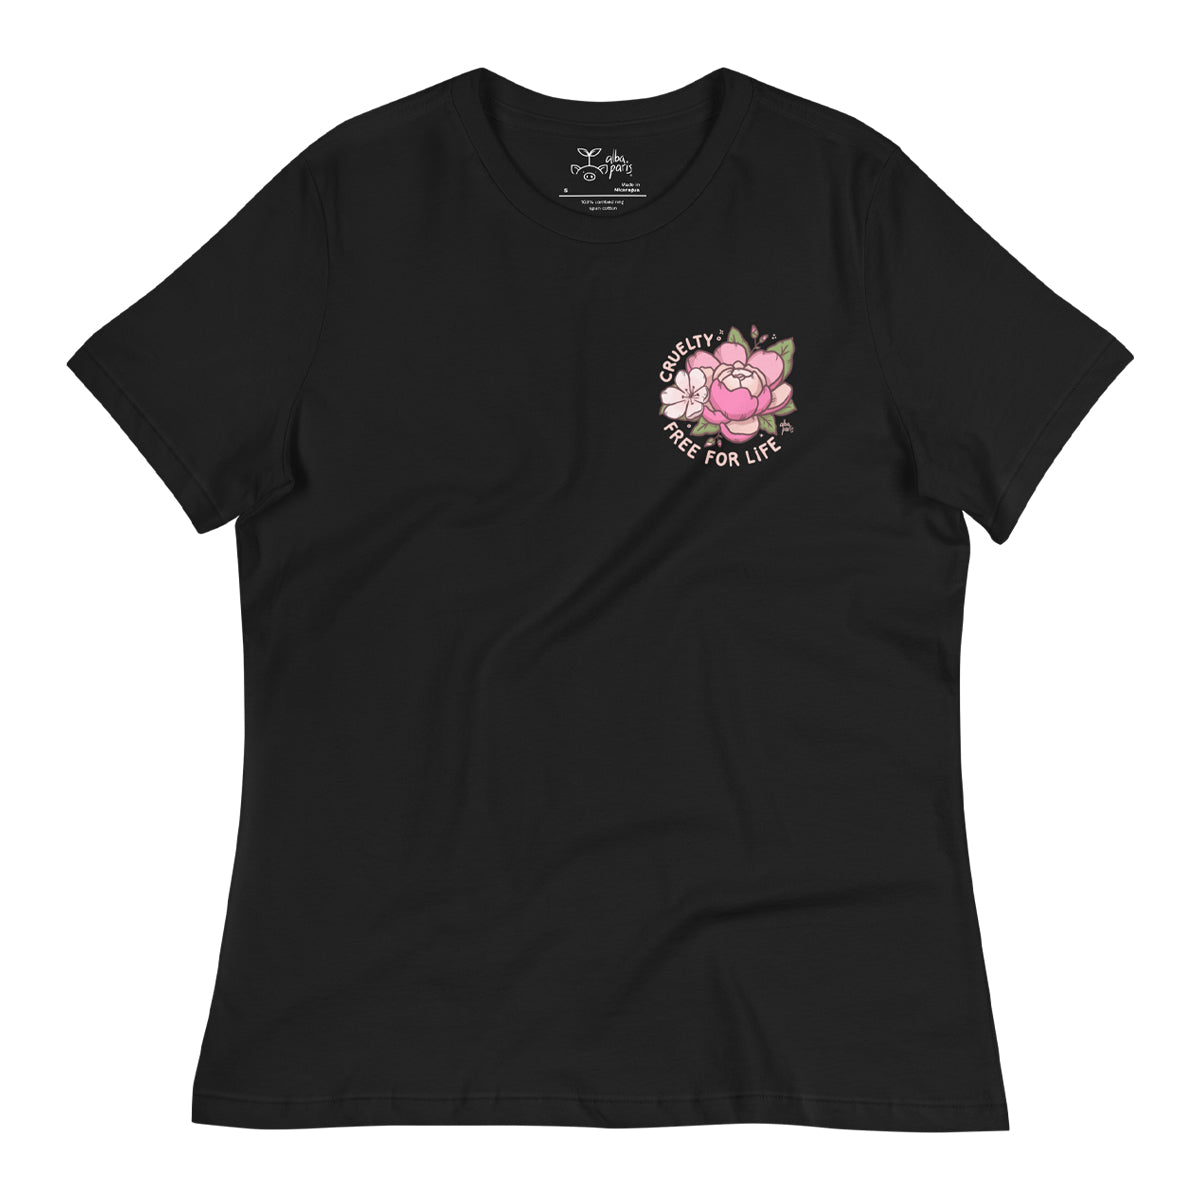 Cruelty-Free For Life Relax Women's* Tee